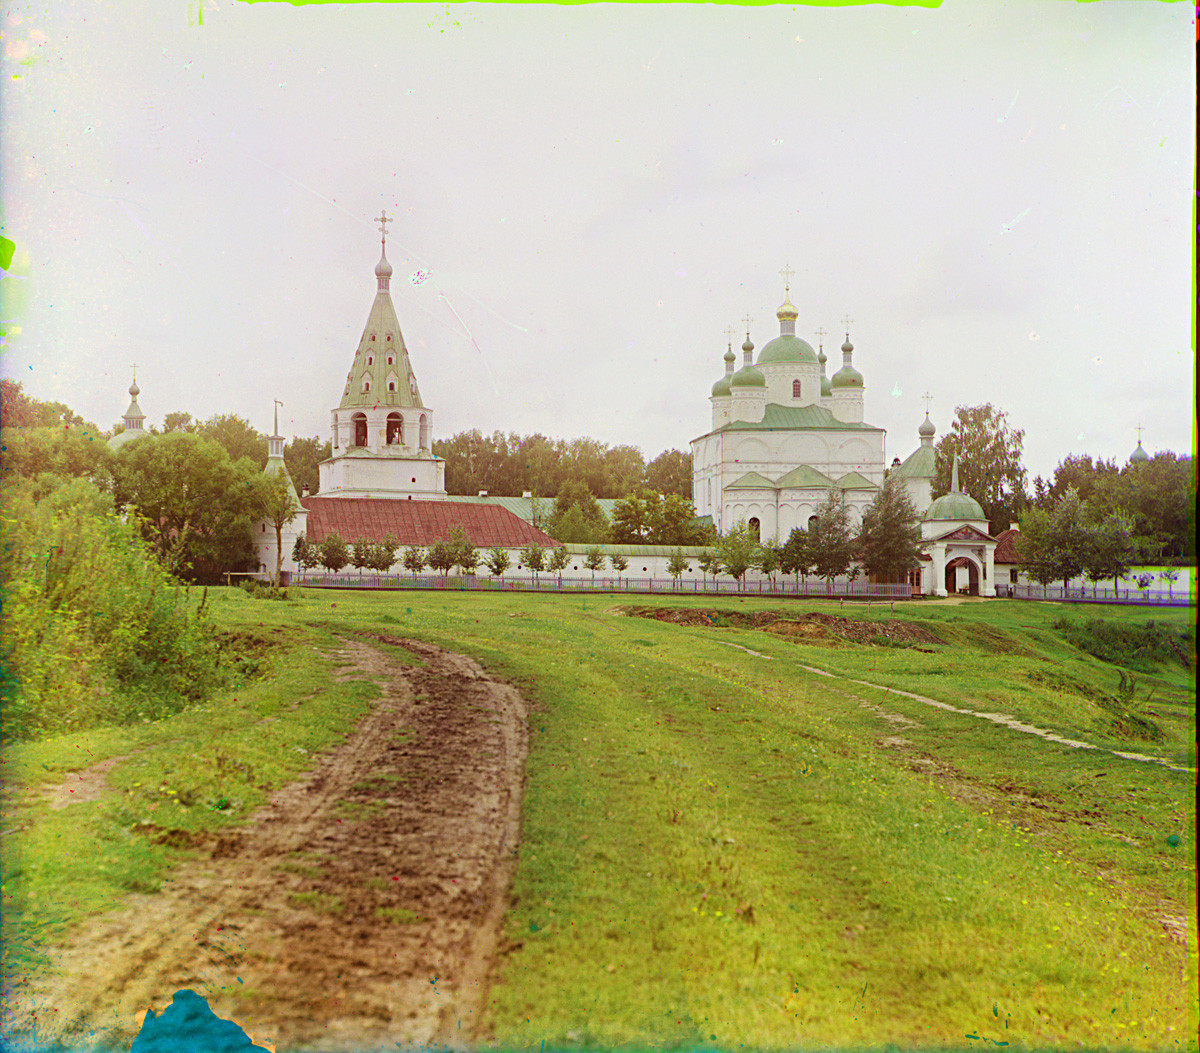 Luzhetsky-St. Ferapont-Nativity of the Virgin Monastery, east view. From left: Bell tower, Nativity Cathedral, Church of St. Ferapont (demolished), East Gate. Summer 1911.